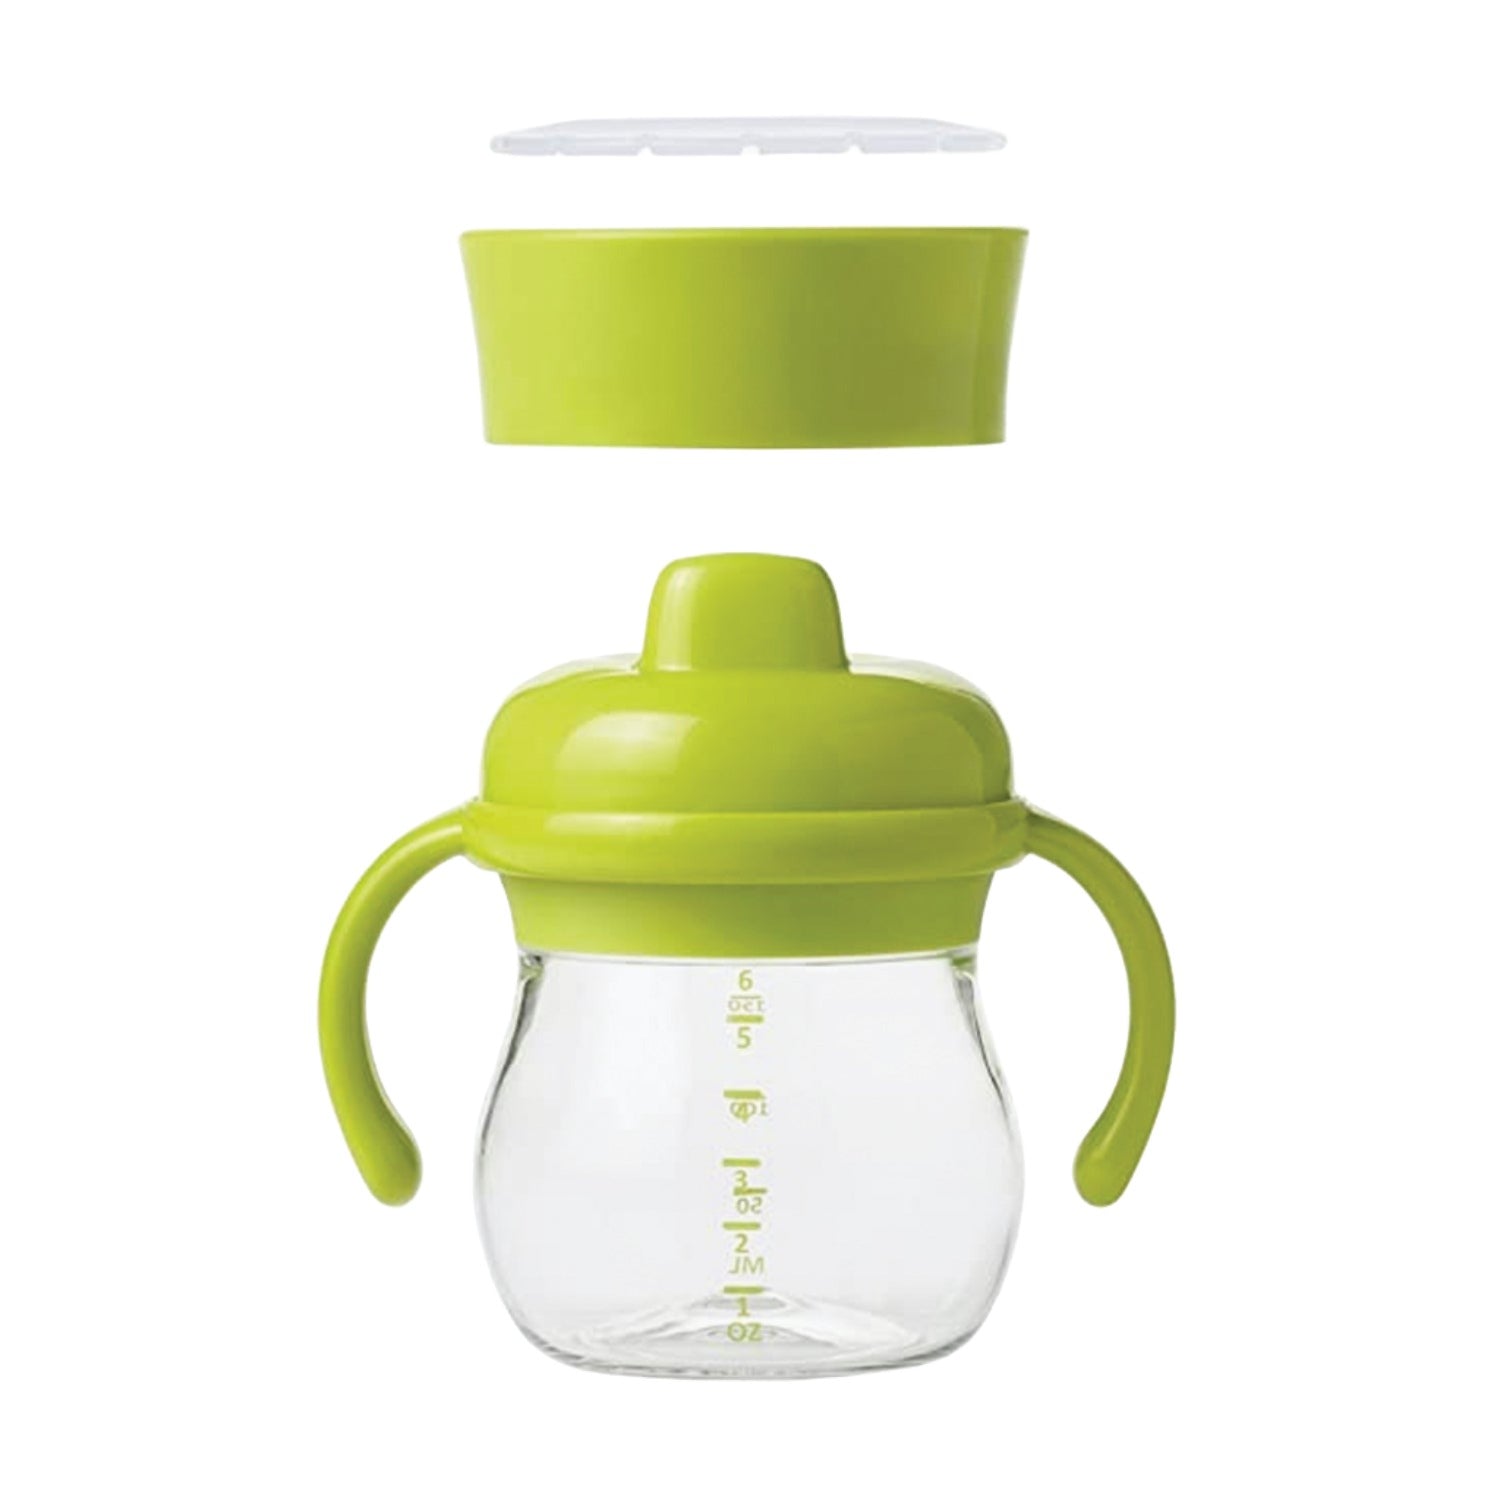 An image of Kids Cup - Sippy Cup - Transitions Hard Spout Sippy Cup Set - Green | OXO Tot